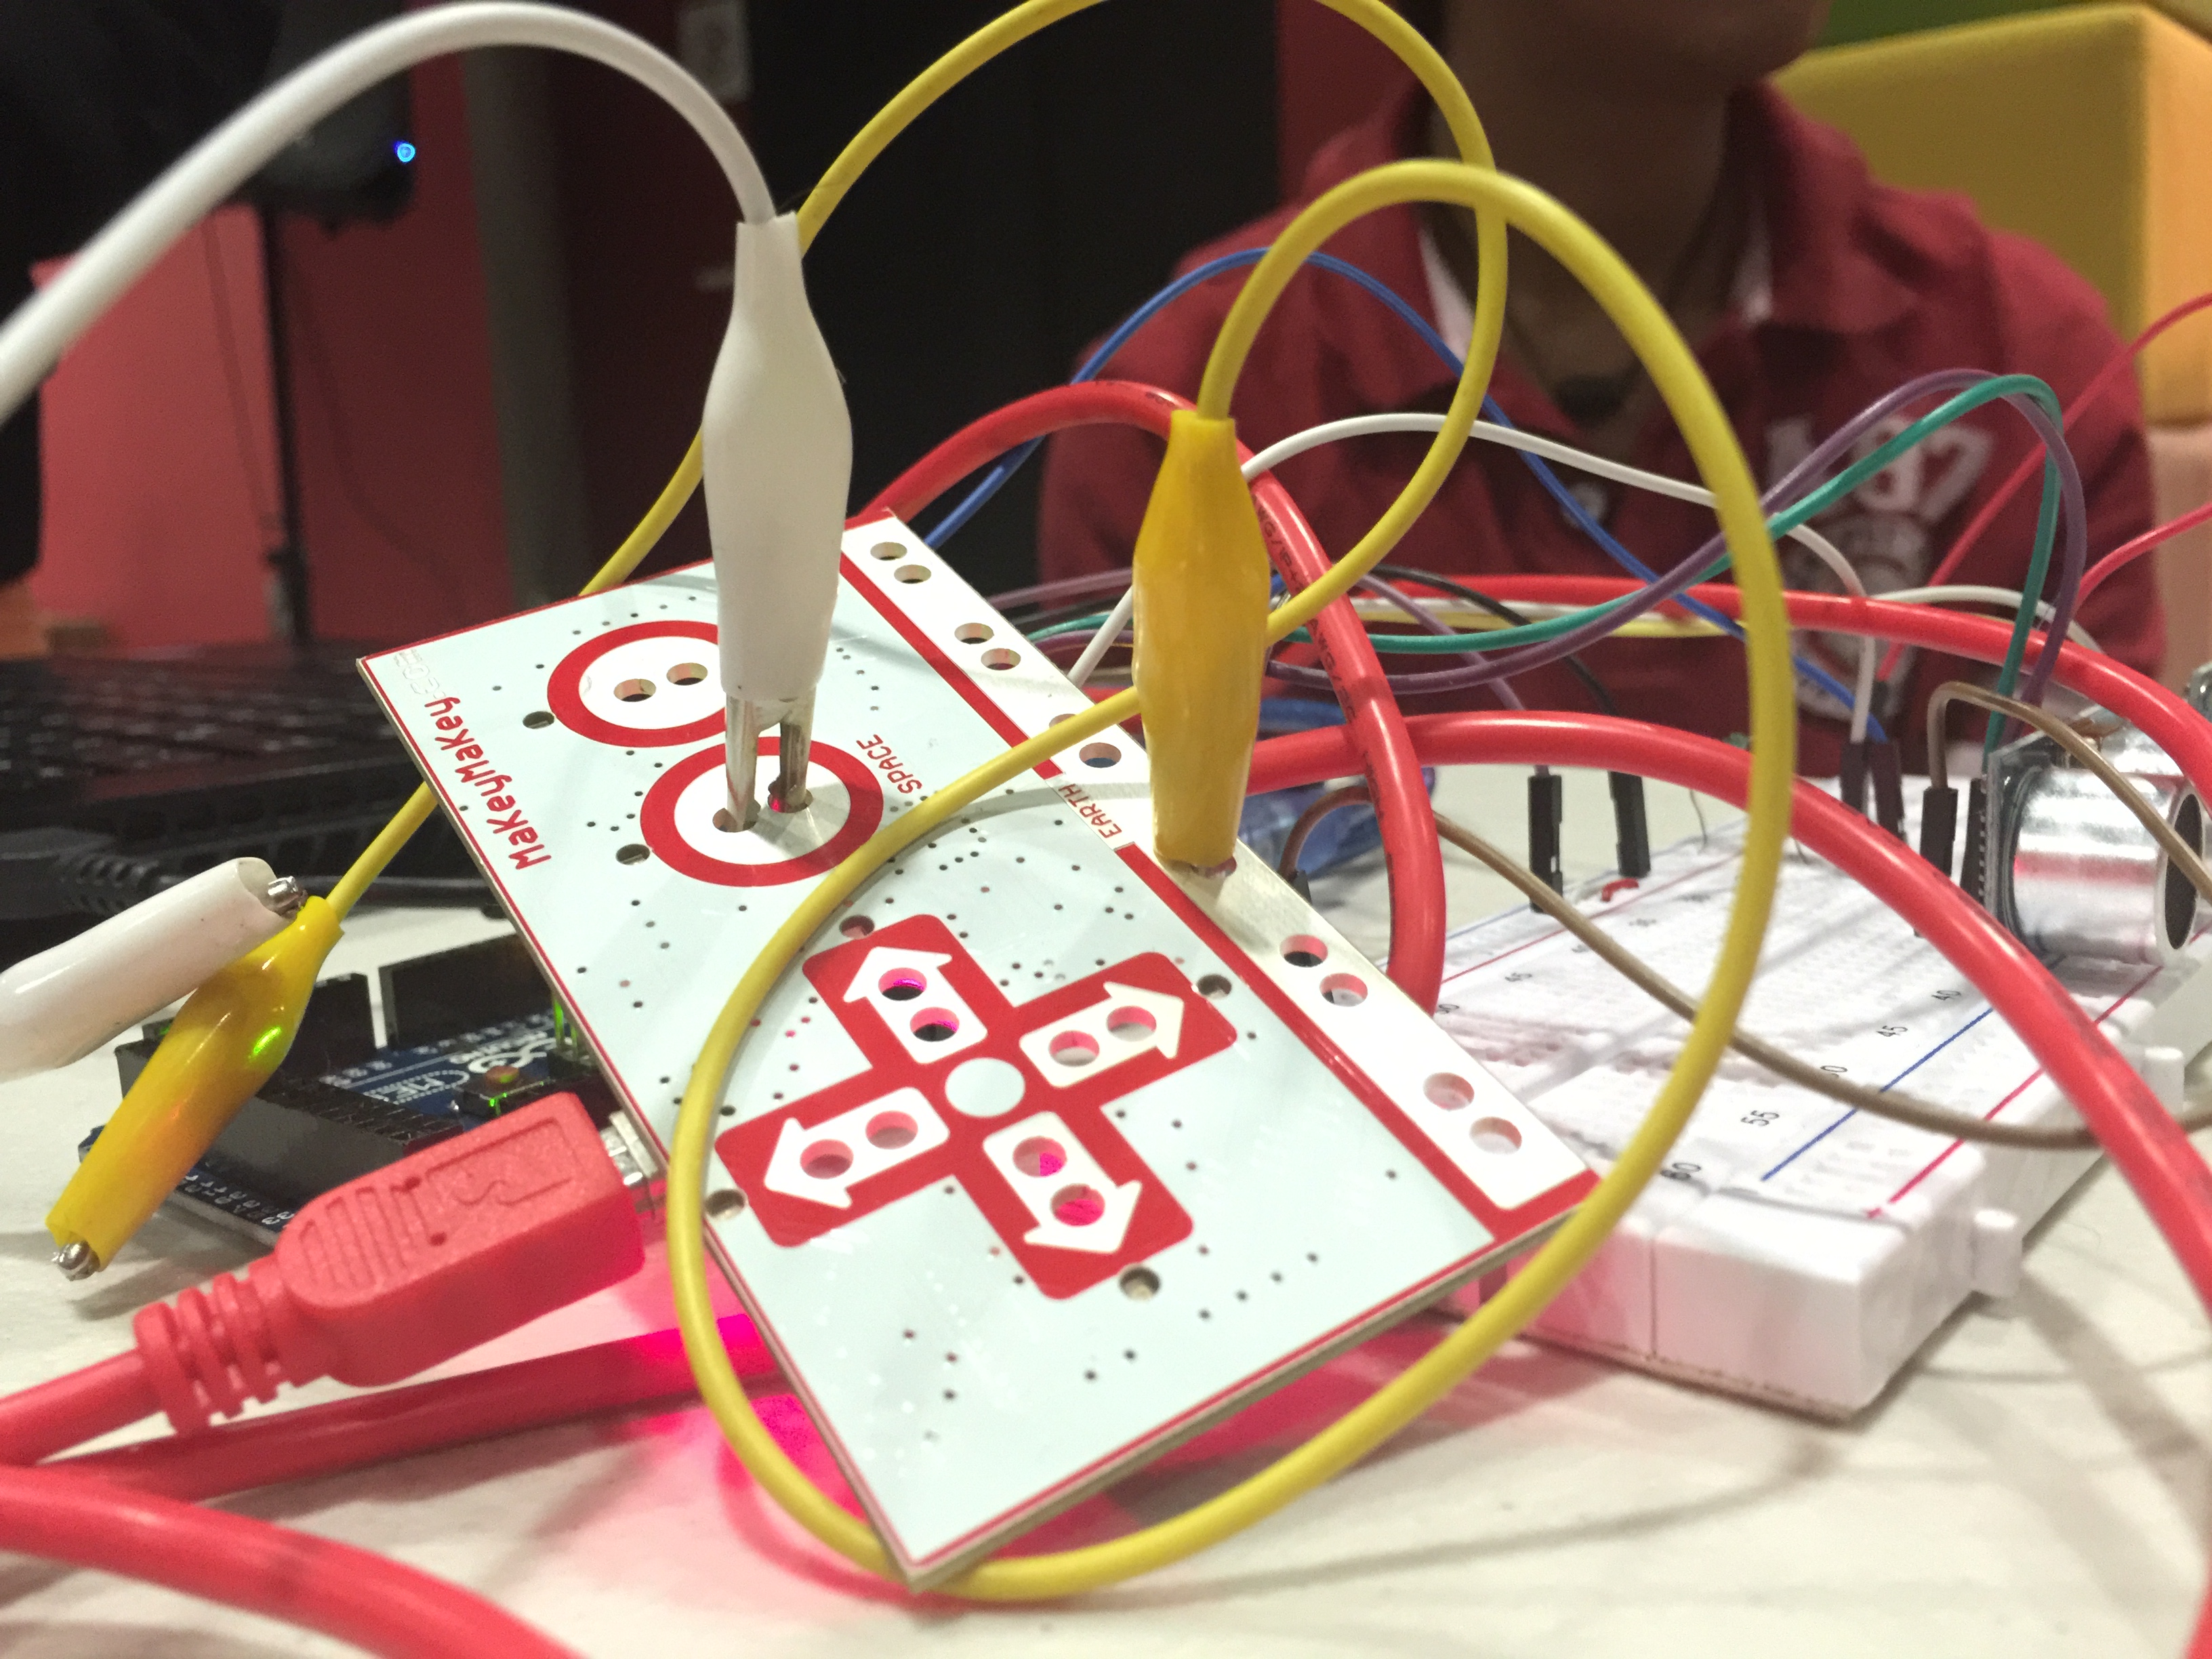 Wires coming out of a makey makey microcontroller